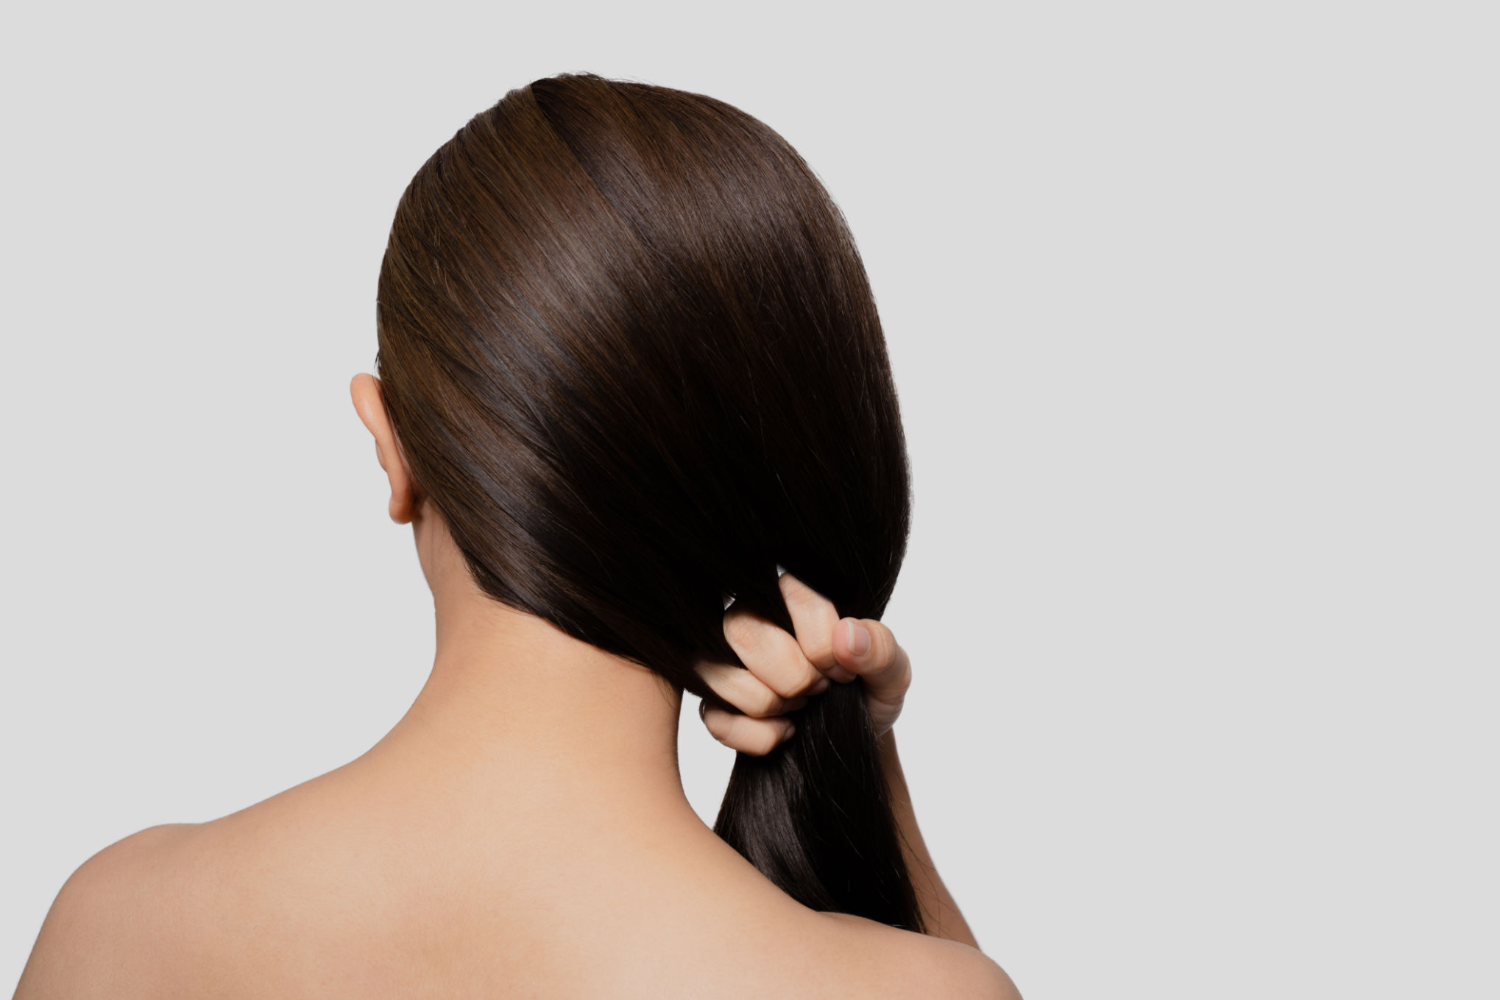 Want Thicker Hair? Here are 5 Tips to Help You Grow it Longer and Stronger